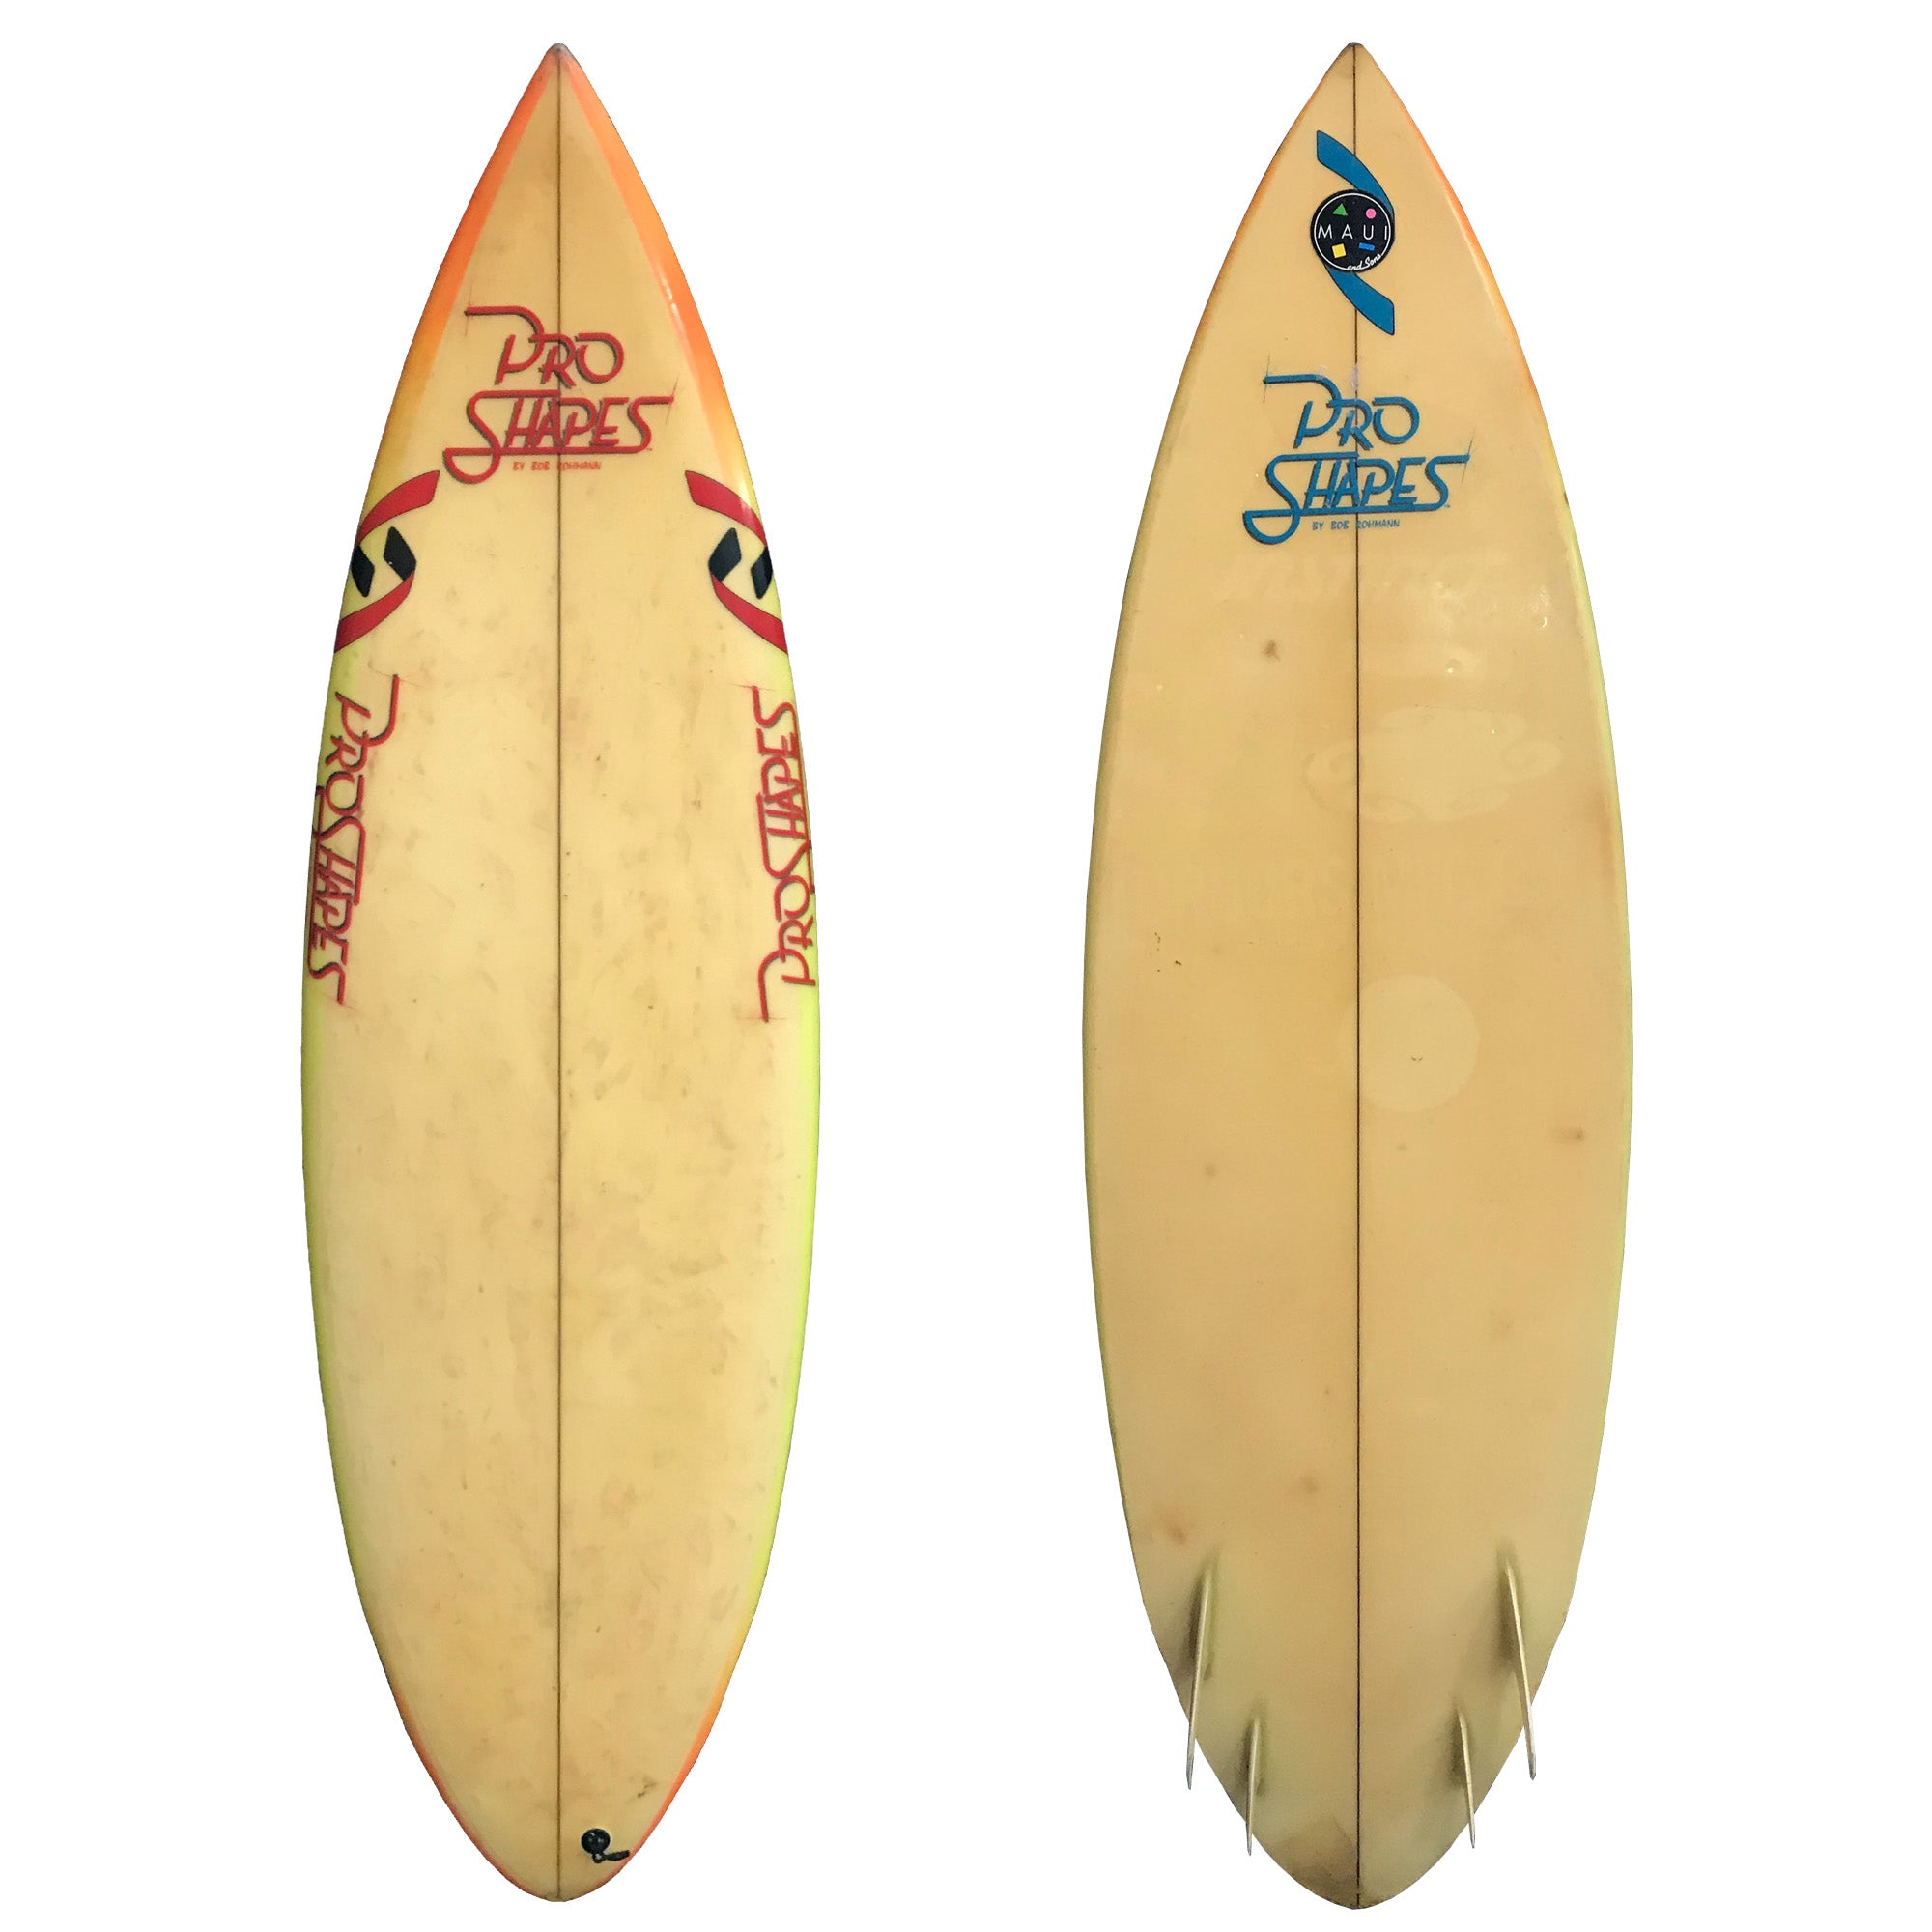 Handshaped by Bob Rohmann Pro Shapes Collector's Surfboard